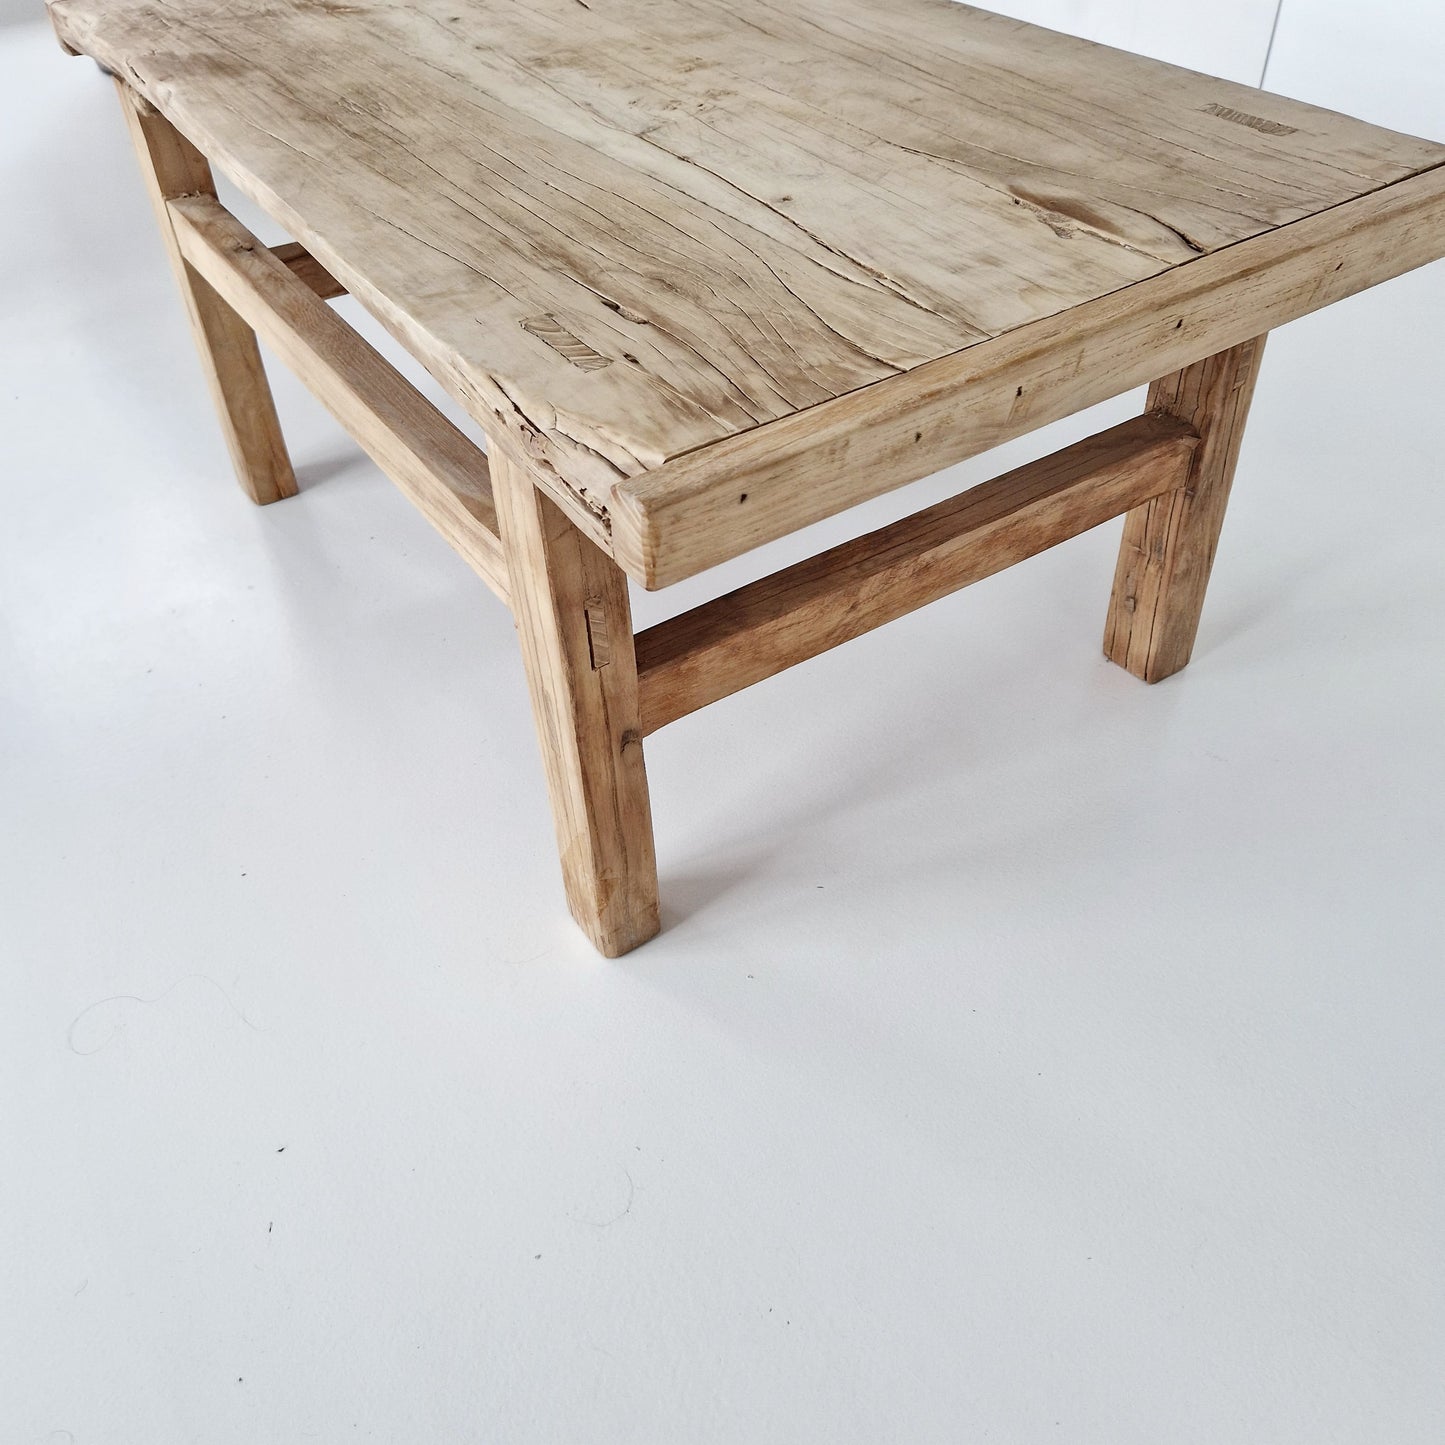 Chinese old wooden table #7 (90,5x53x40)